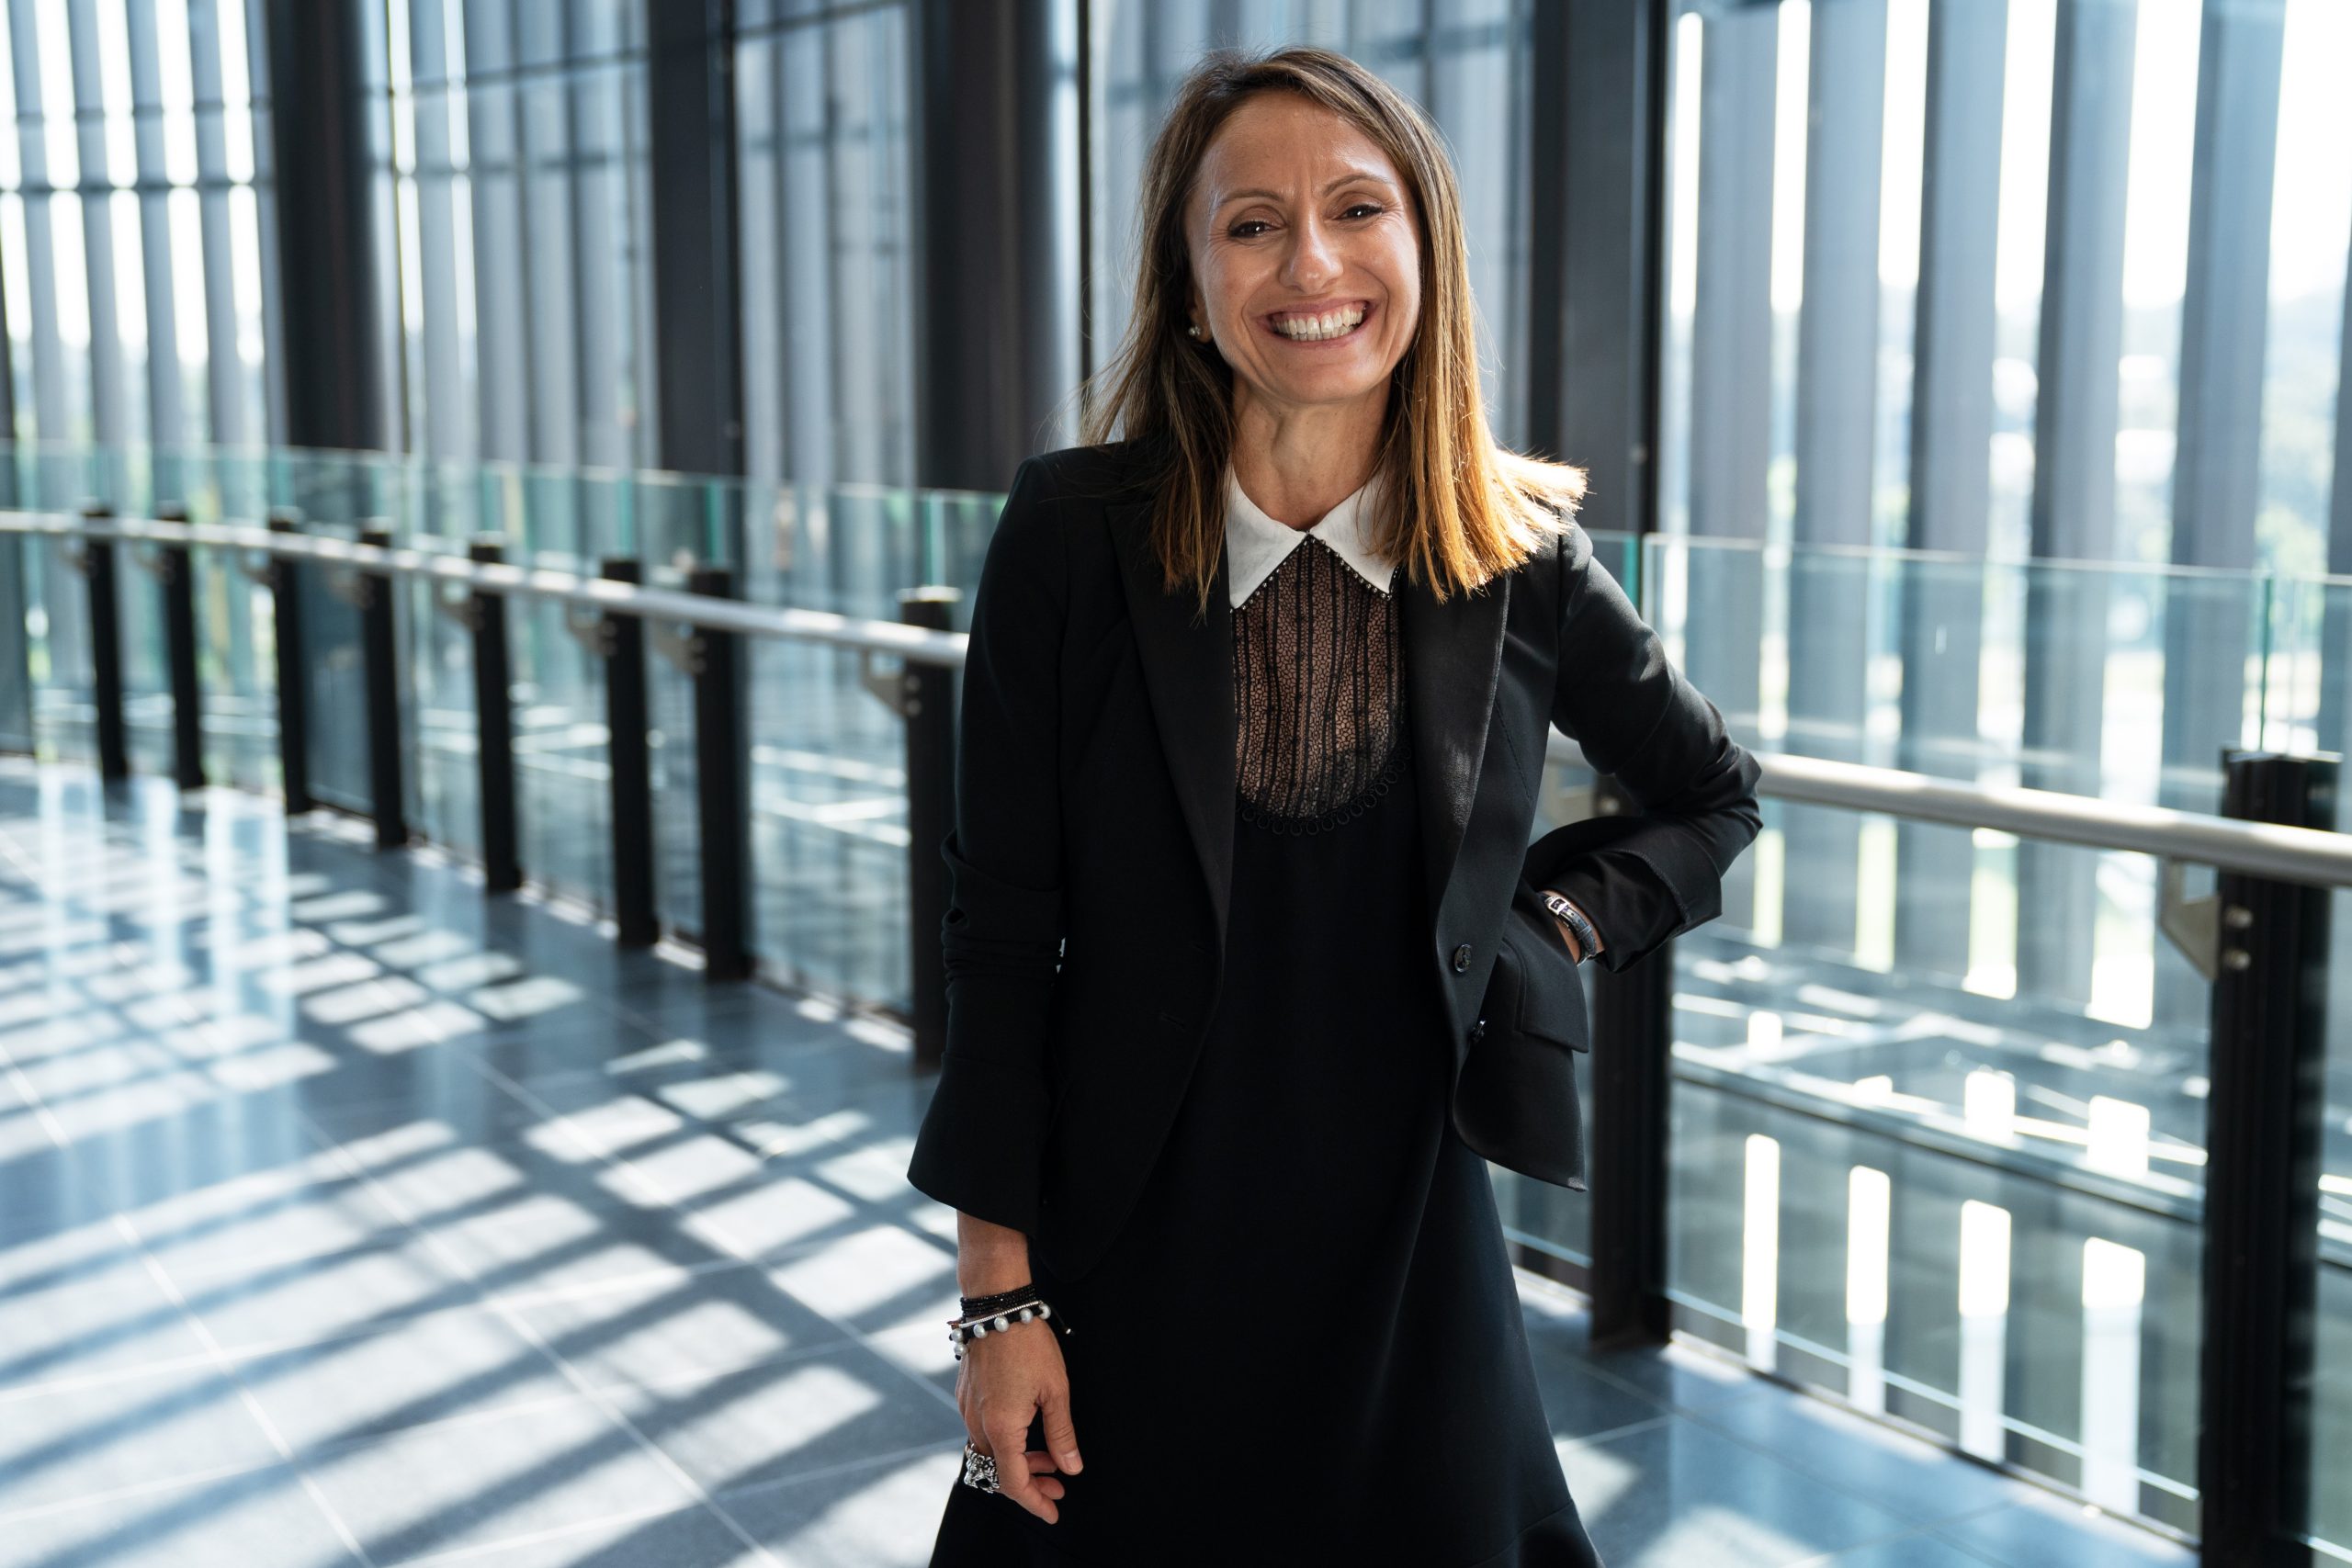 DAZN GROUP APPOINTS ALICE MASCIA AS CEO OF DACH